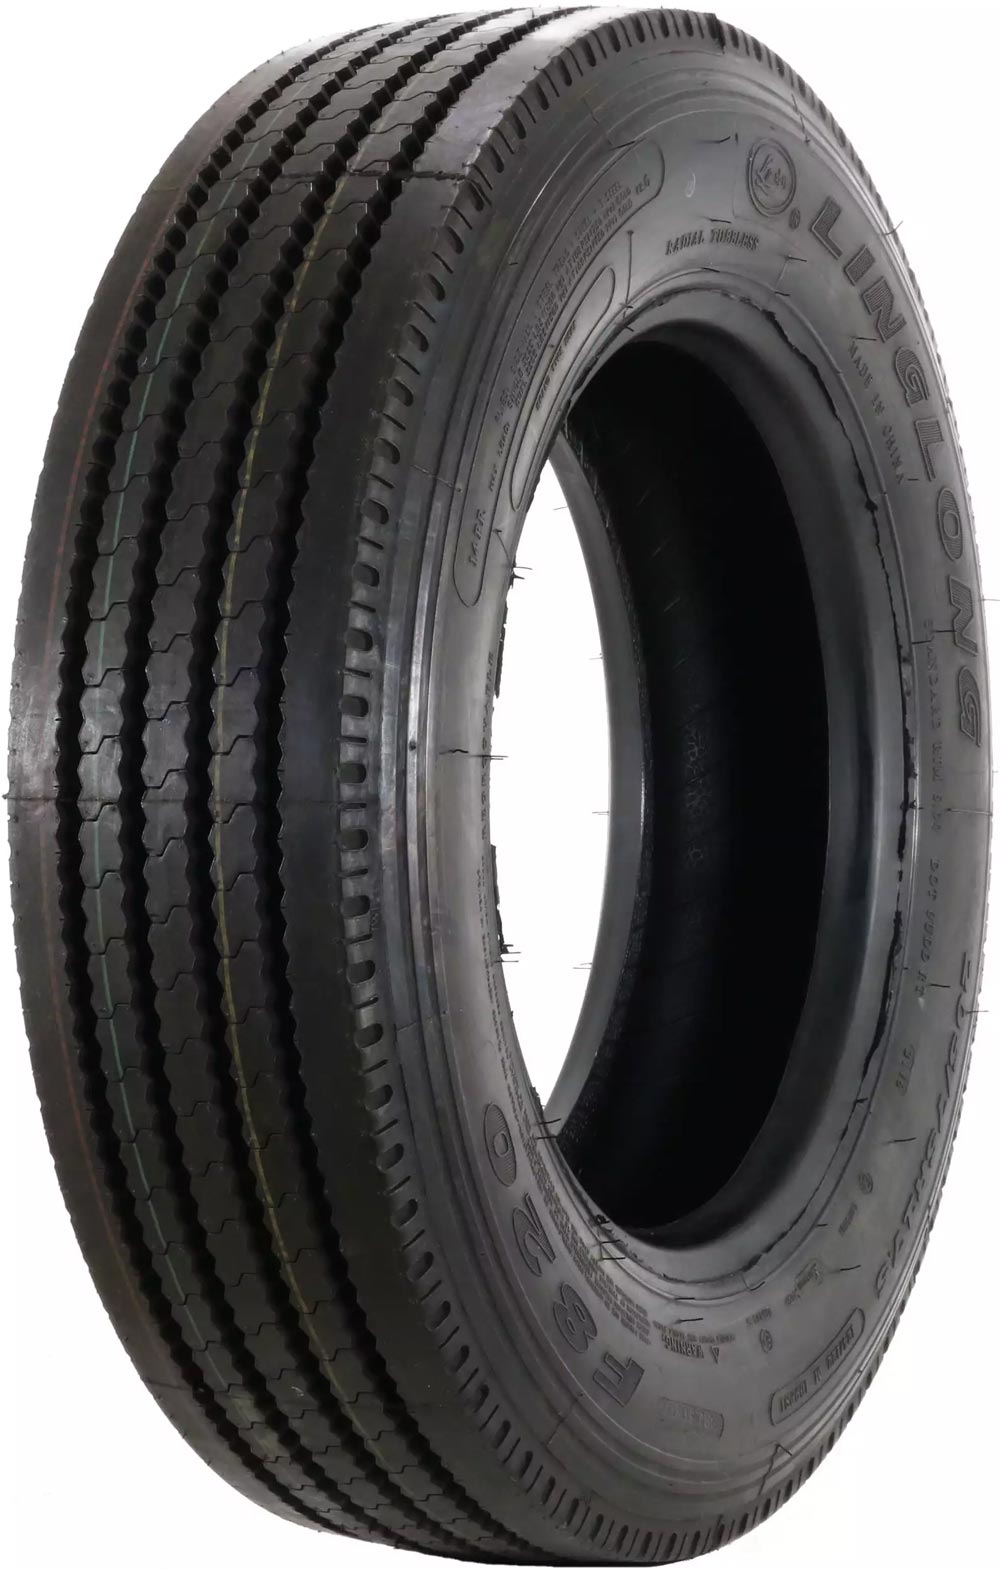 product_type-heavy_tires LINGLONG F820 14PR 205/75 R17.5 124M